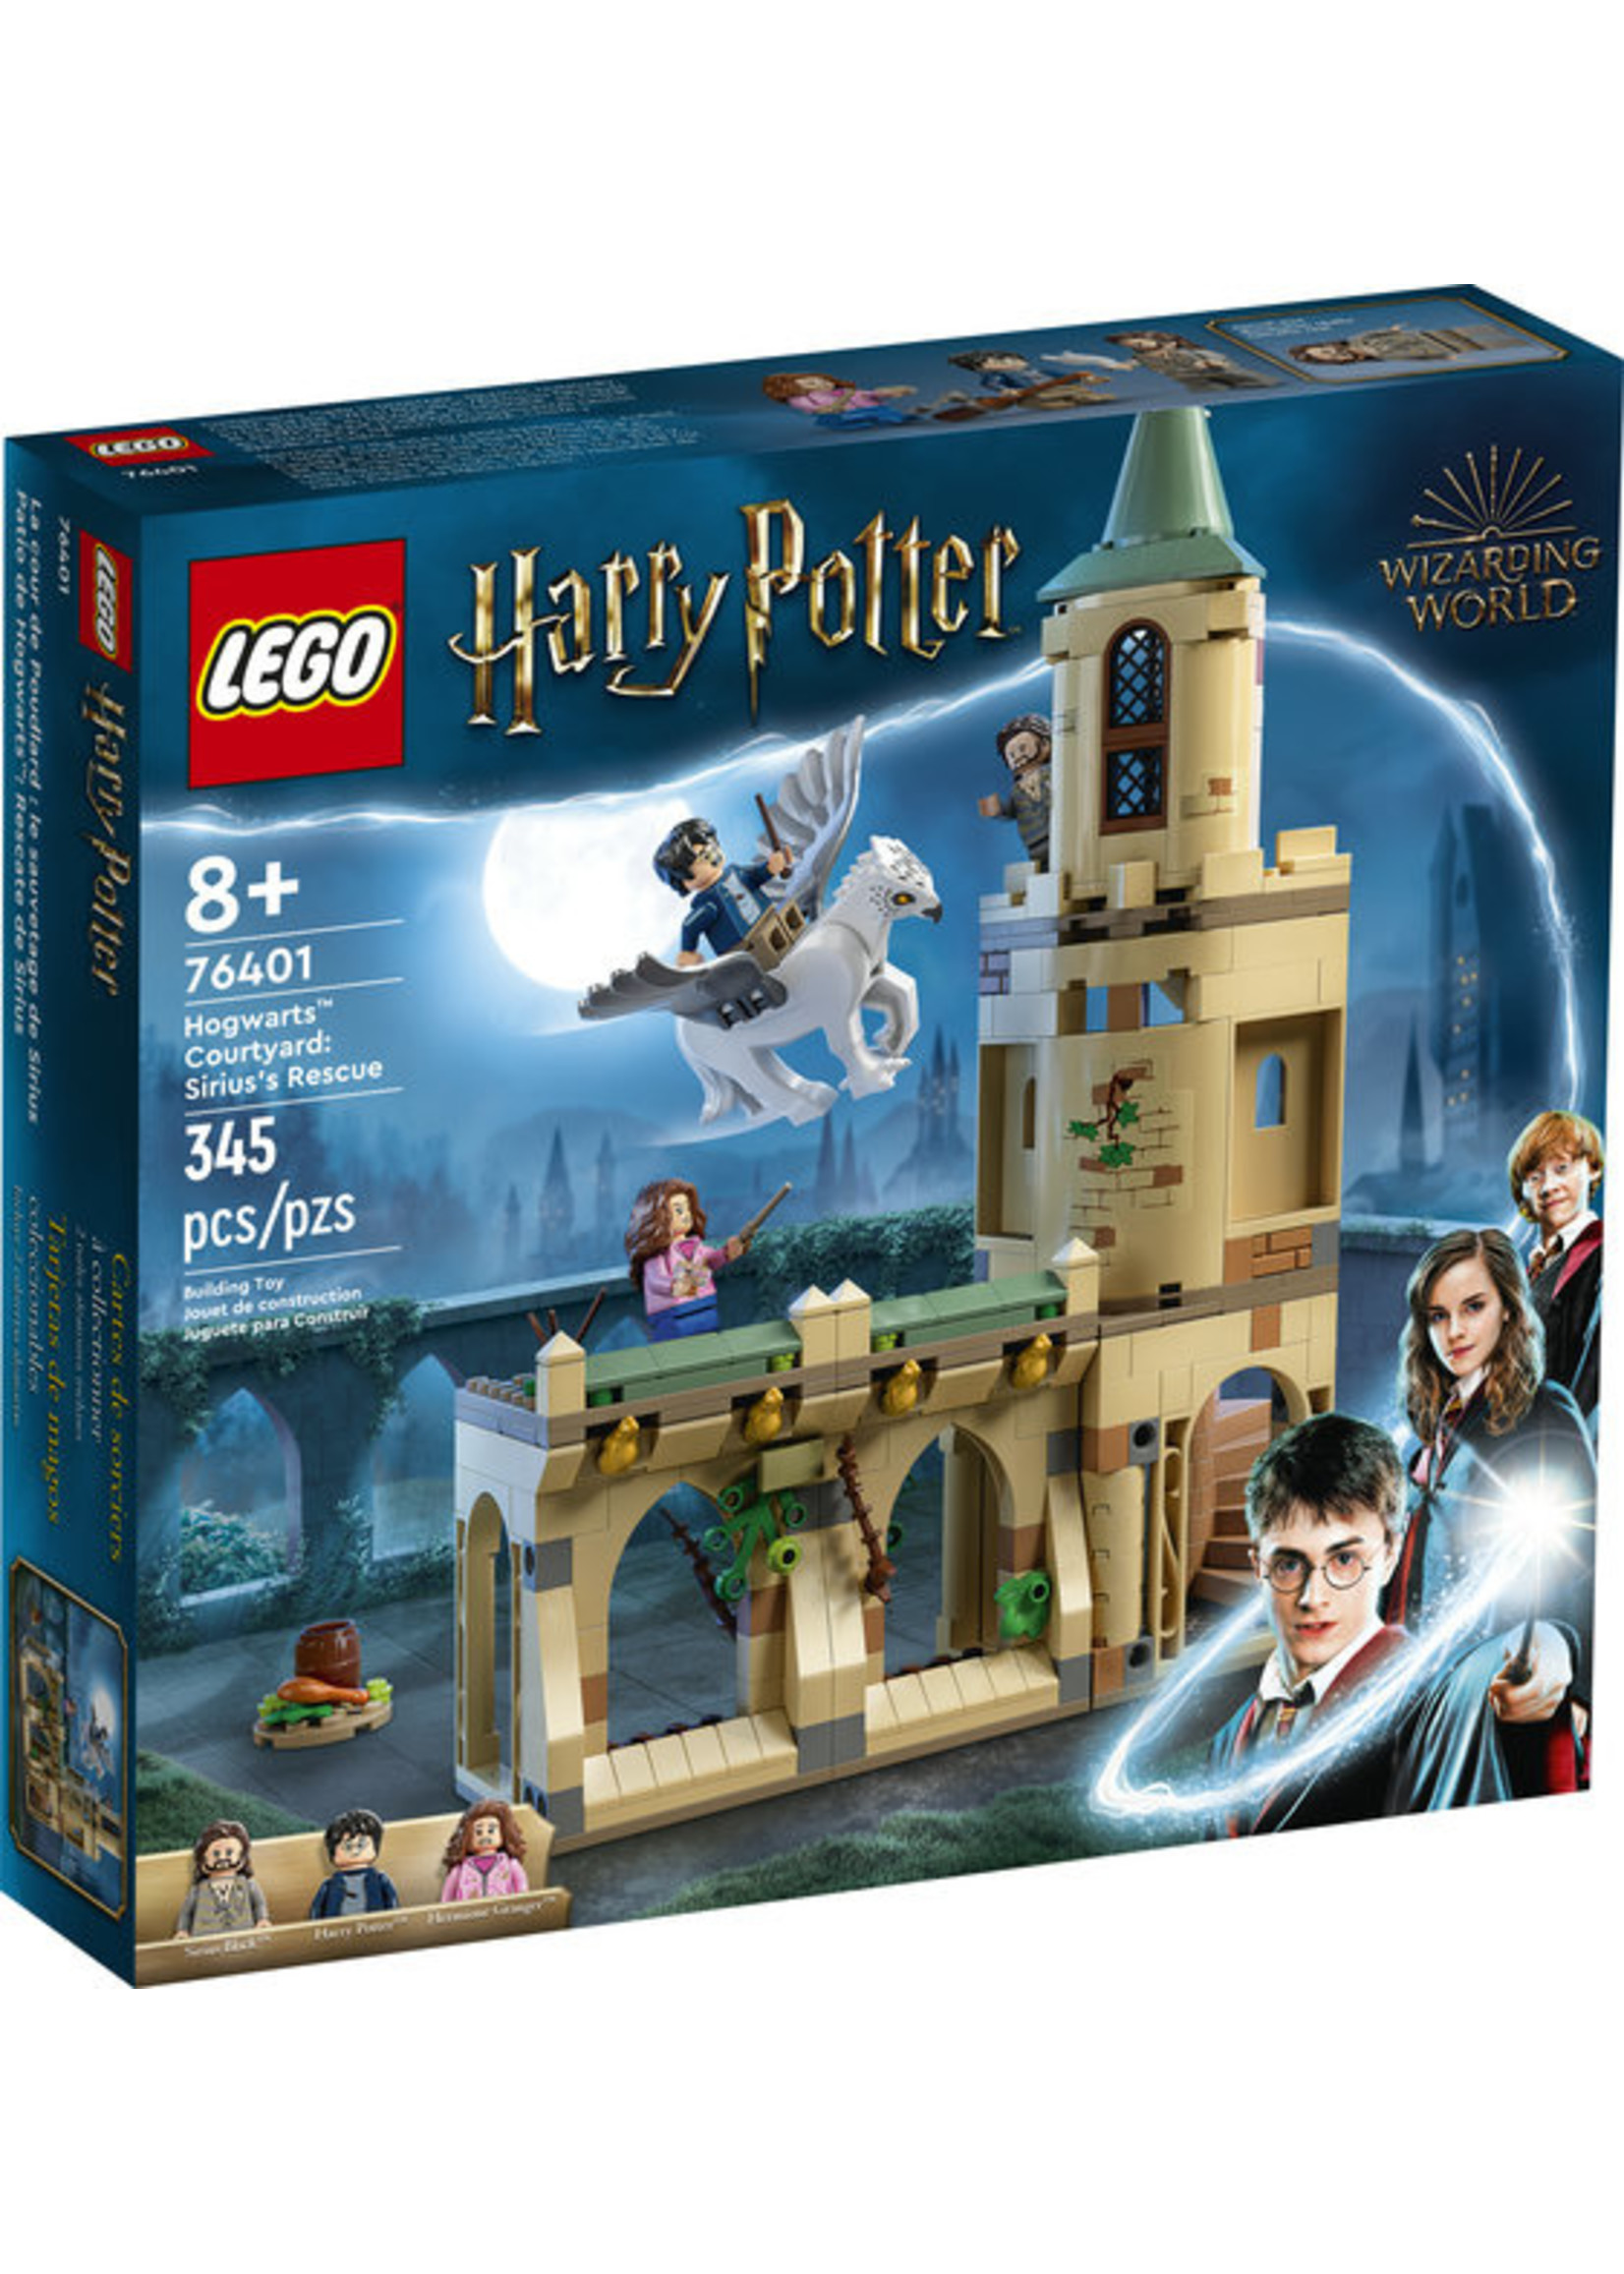 Explore the Magical World of Hogwarts with LEGO Harry Potter